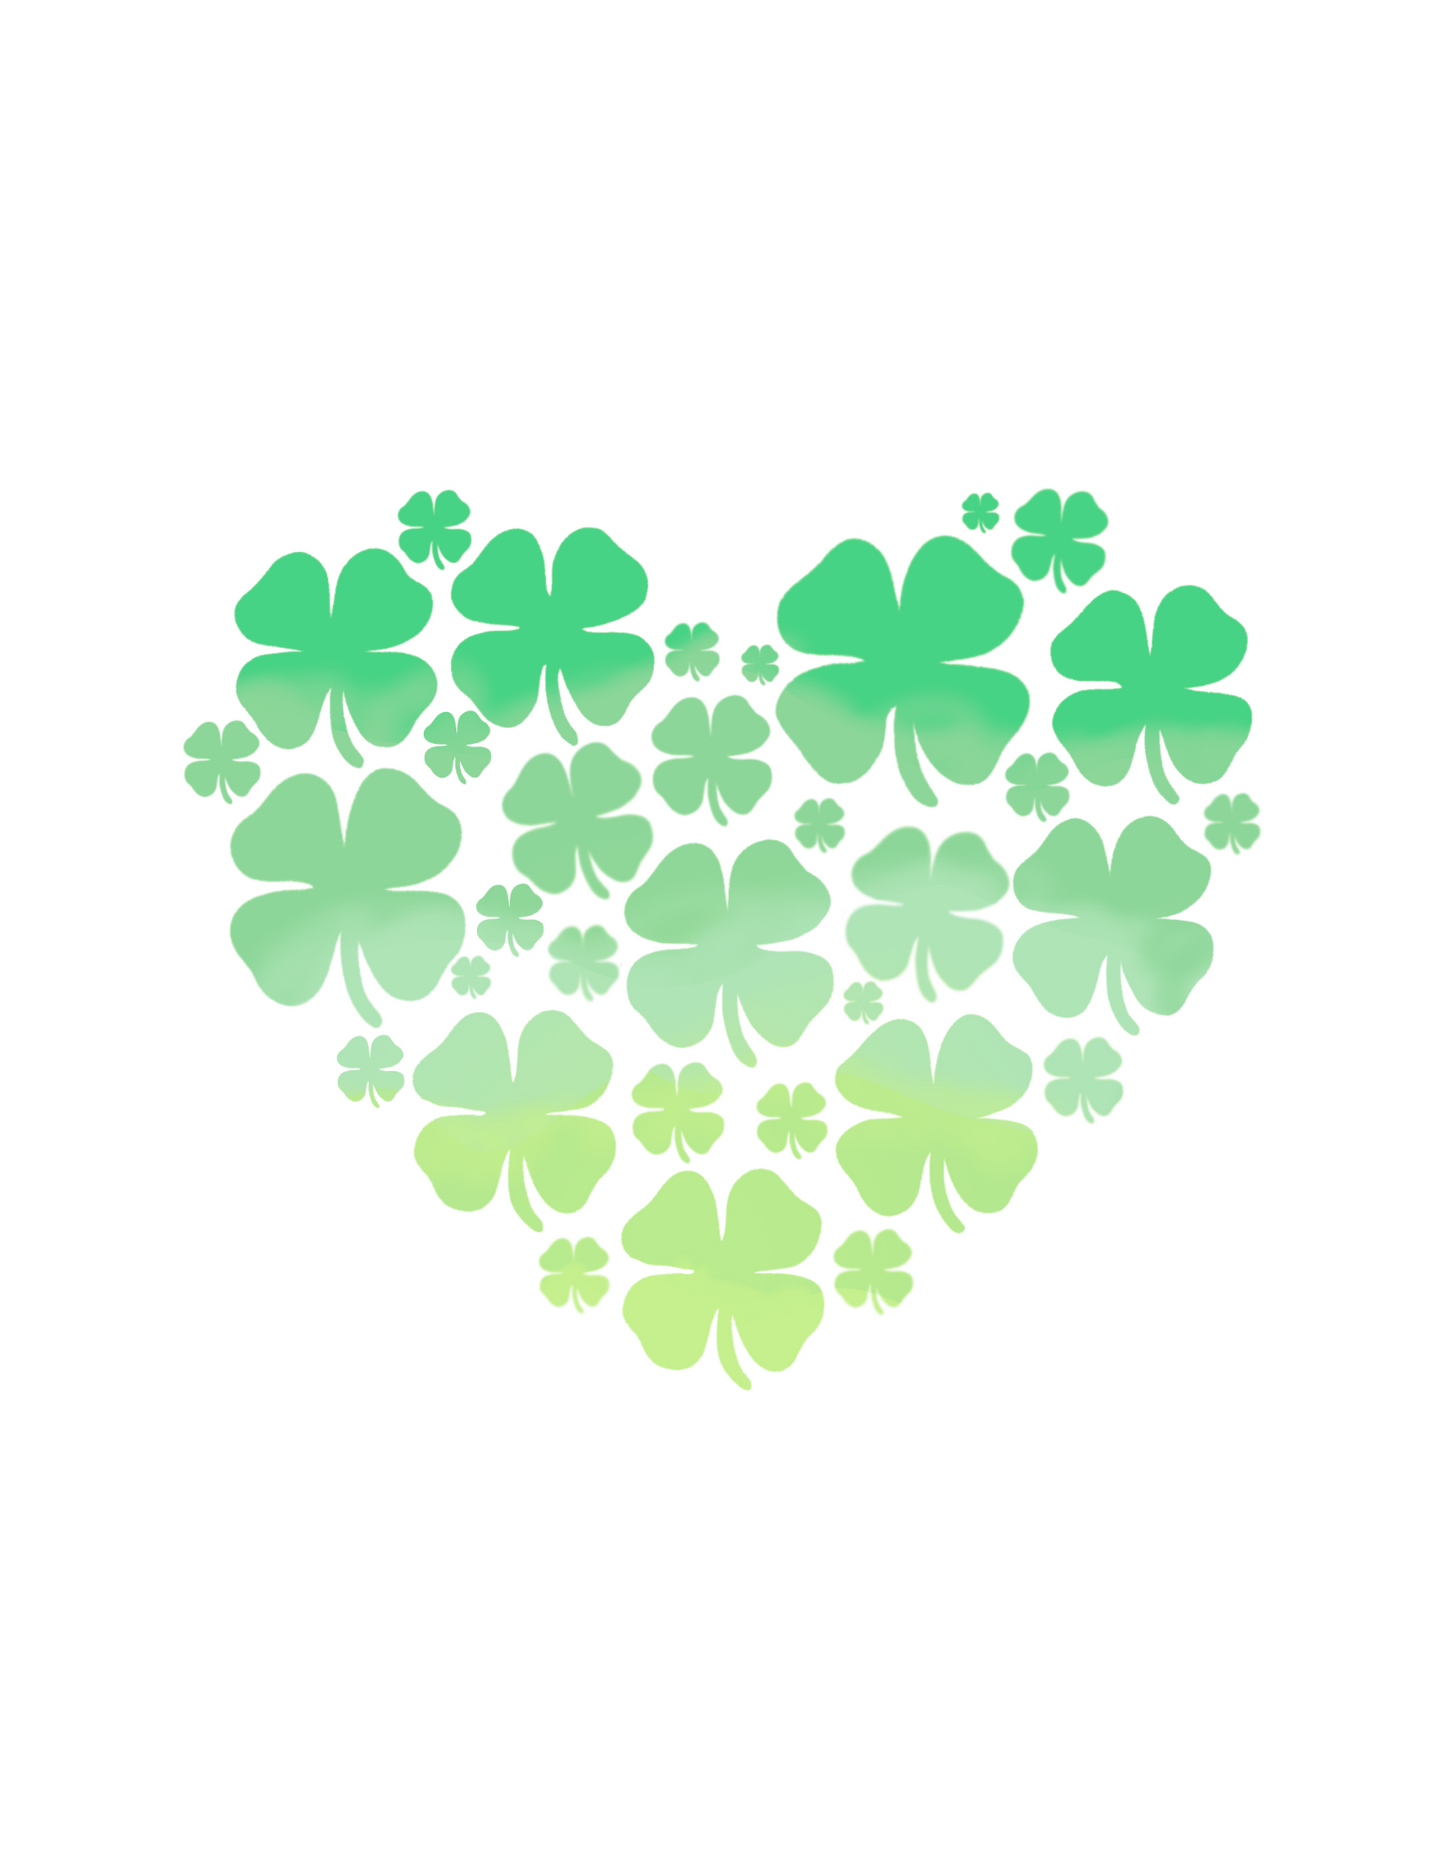 The Luckiest St. Patrick's Day | Printable Bundle